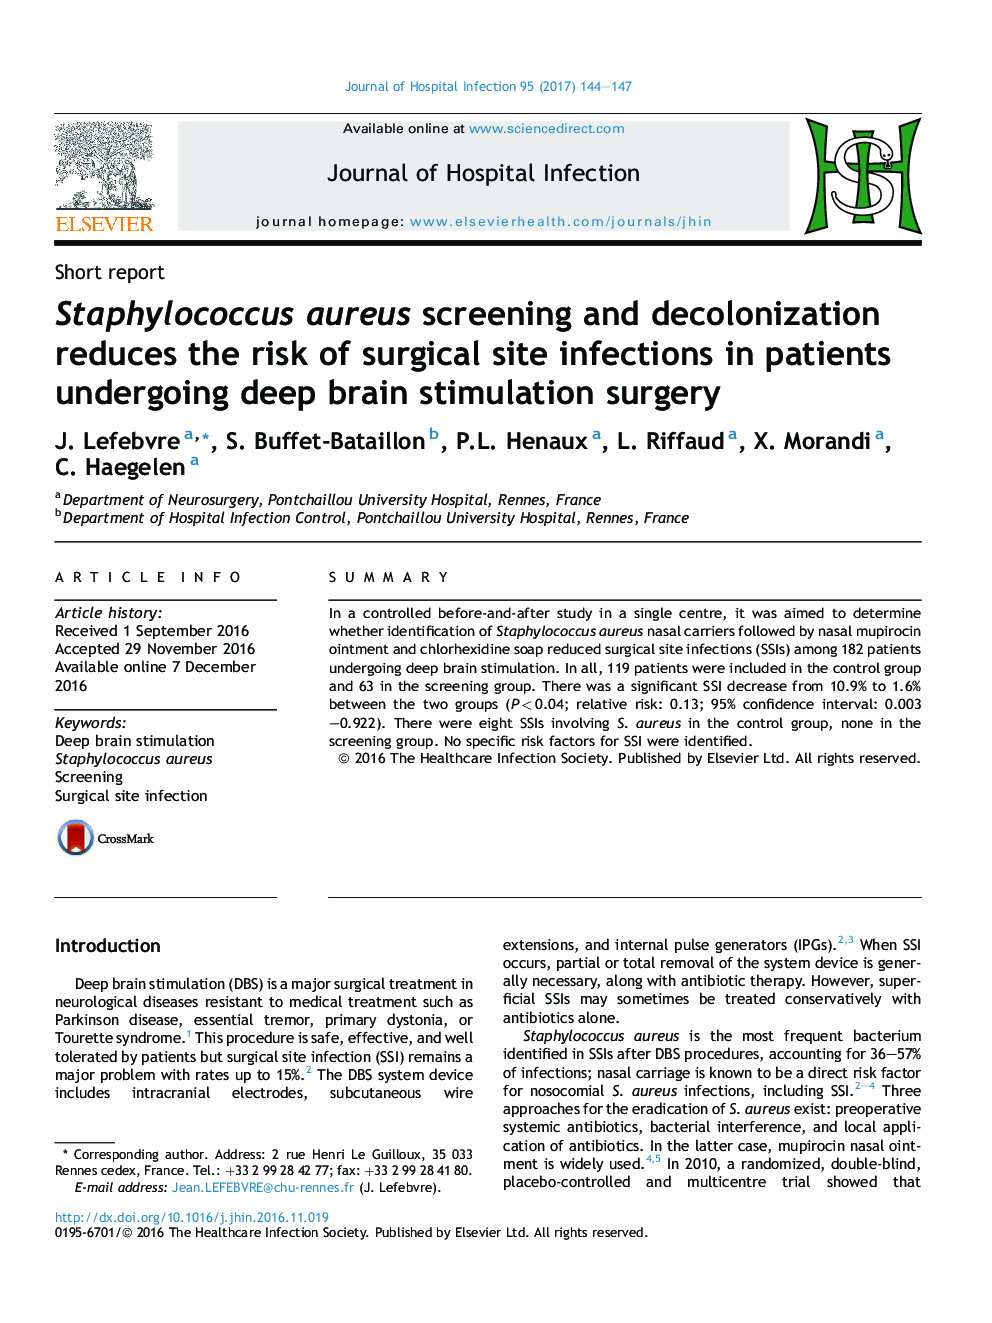 Staphylococcus aureus screening and decolonization reduces the risk of surgical site infections in patients undergoing deep brain stimulation surgery